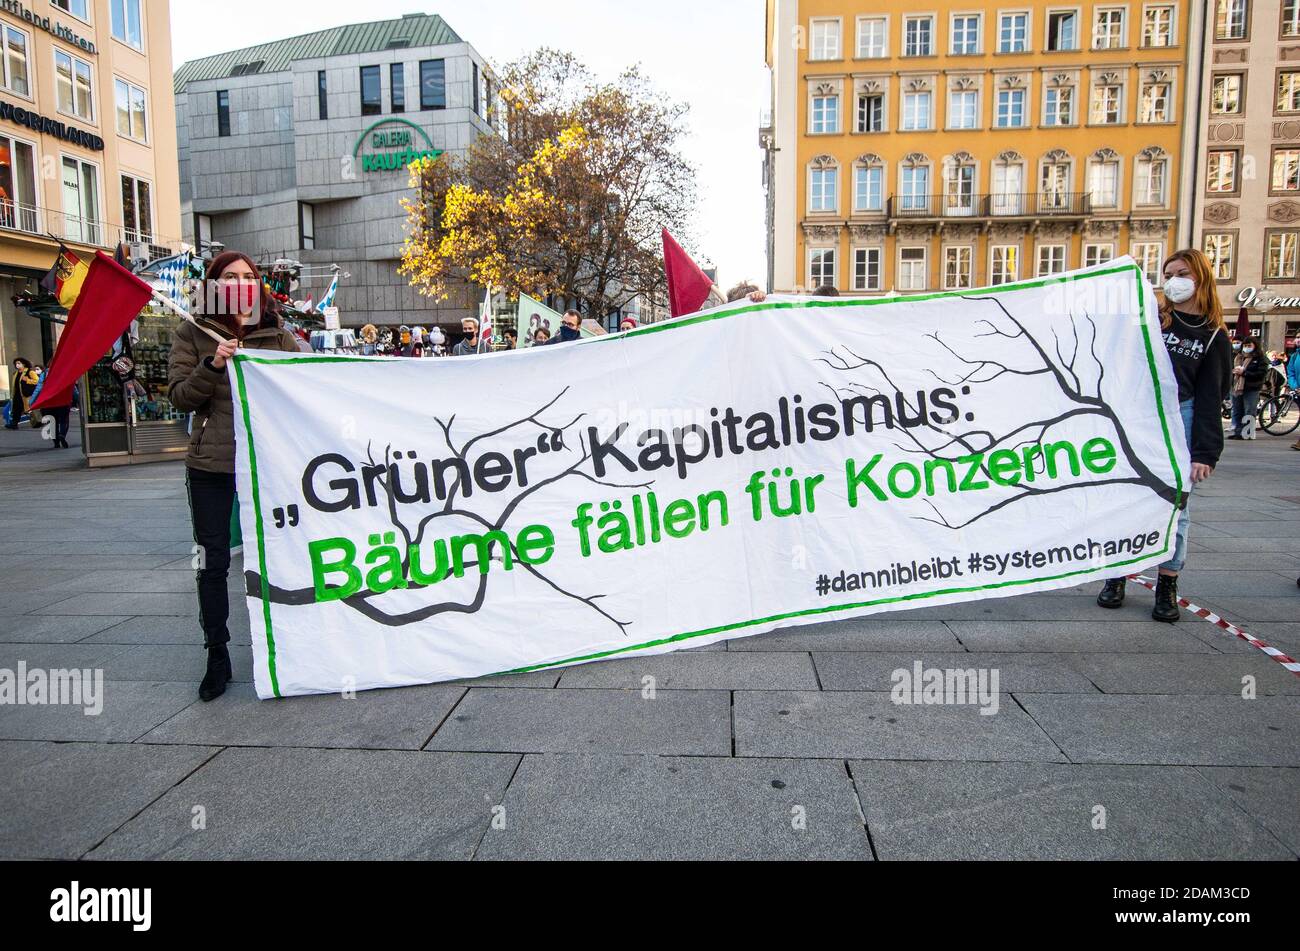 Munich, Bavaria, Germany. 13th Nov, 2020. Fridays for Future Germany has returned to the streets during the second wave of Coronavirus to protest against the clearing of the DannenrodÂ Forest (DannenrÃ¶derÂ Forst). The demonstrators marched from Marienplatz to the Green Party offices where three protestors climbed a tree a hung a banner which eventually resulted in a police response that was initially peacefully resolved until unidentified plainclothes officers attempted an apprehension without identifying themselves according to witnesses. The forest is currently being clearedÂ for the Aut Stock Photo